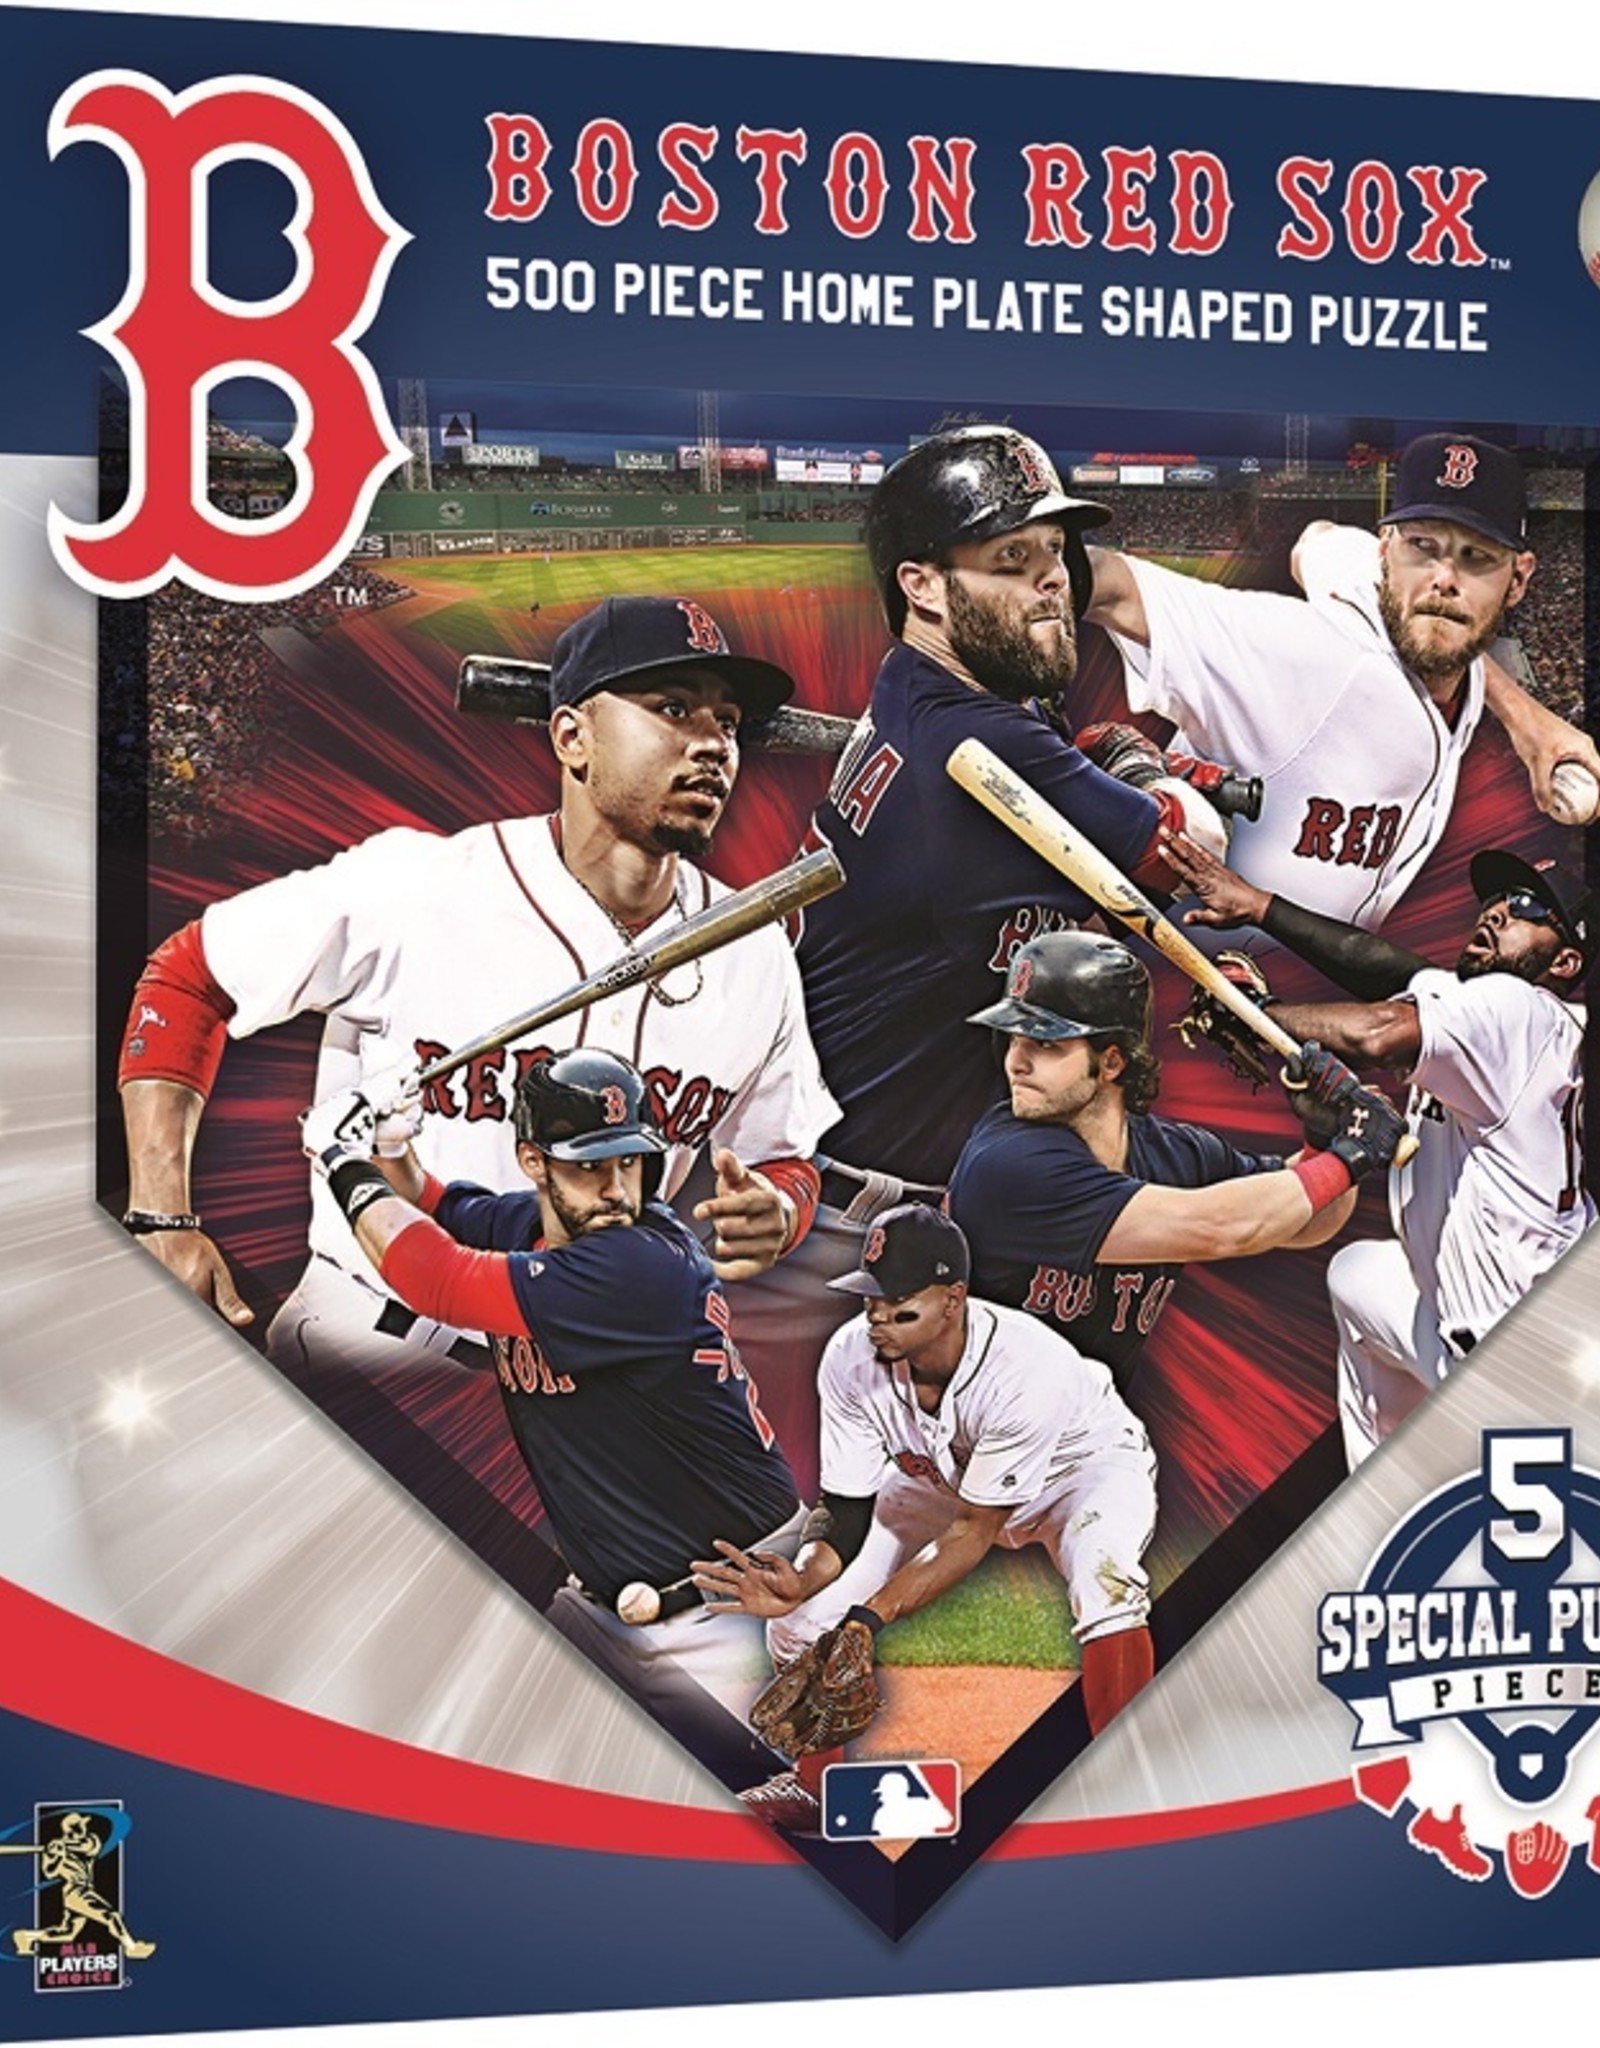 Masterpieces Puzzles & Games Boston Red Sox Home Plate Shaped Puzzle (500pc)